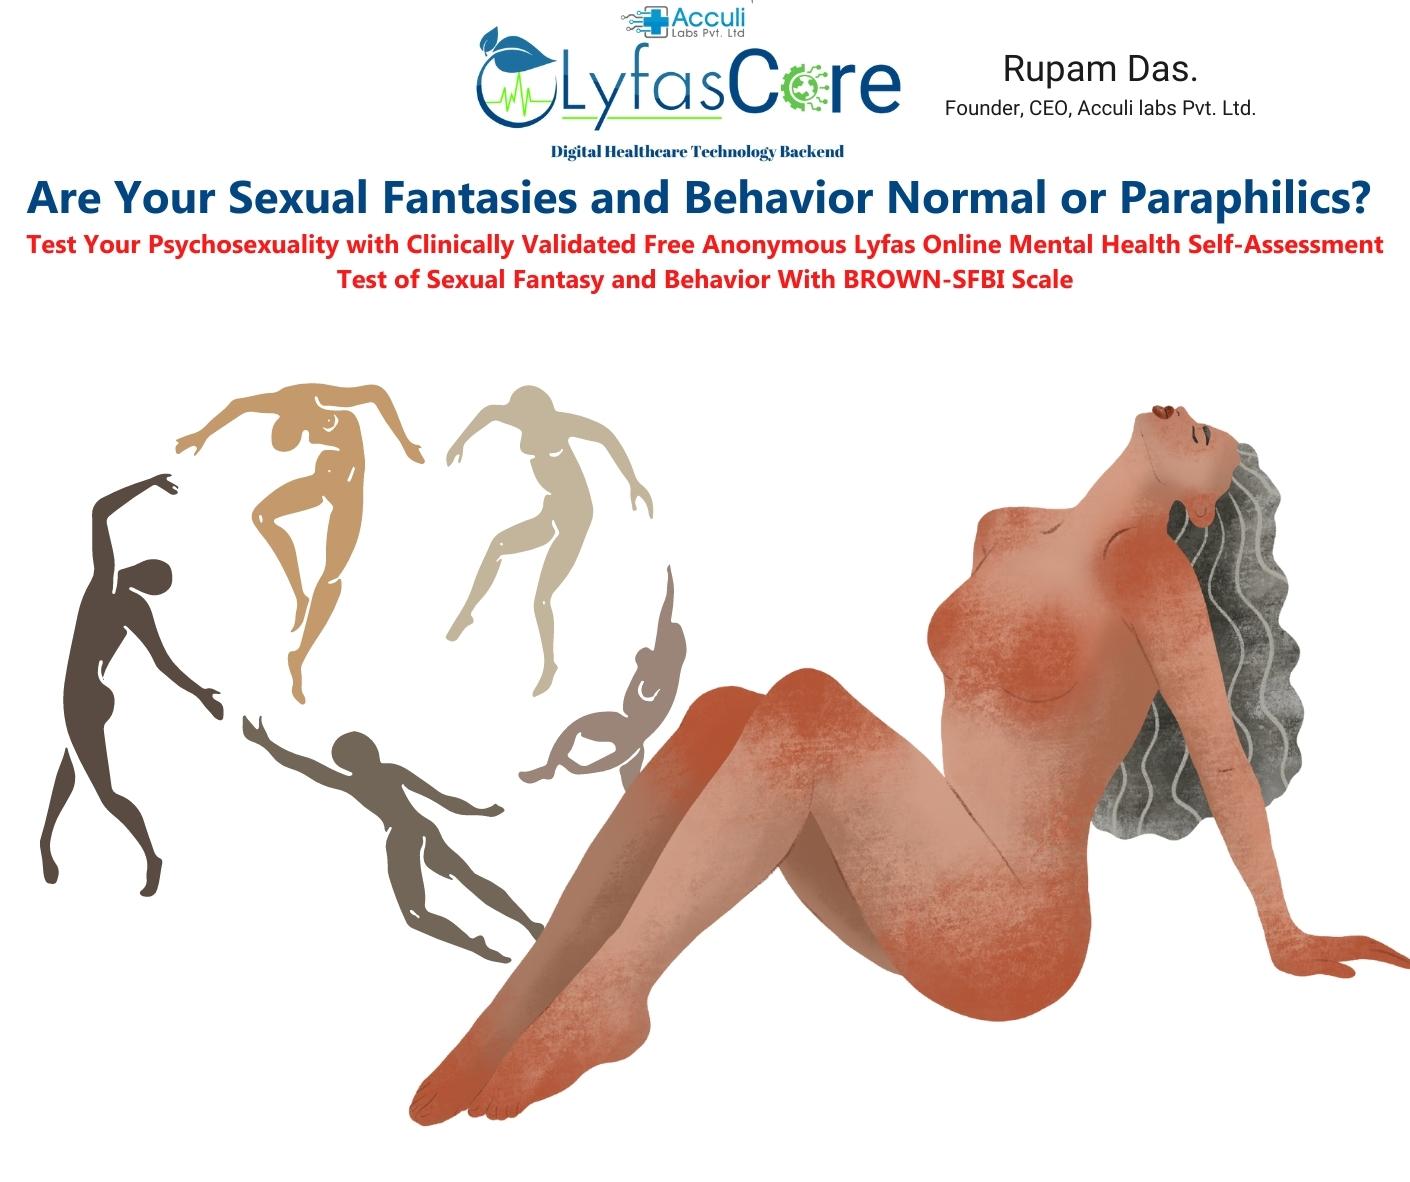 Are Your Sexual Fantasies and Behavior Normal or Paraphilics? Test Your Psychosexuality with Clinically Validated Free Anonymous Lyfas Online Mental Health Self-Assessment Test of Sexual Fantasy and Behavior With BROWN-SFBI Scale